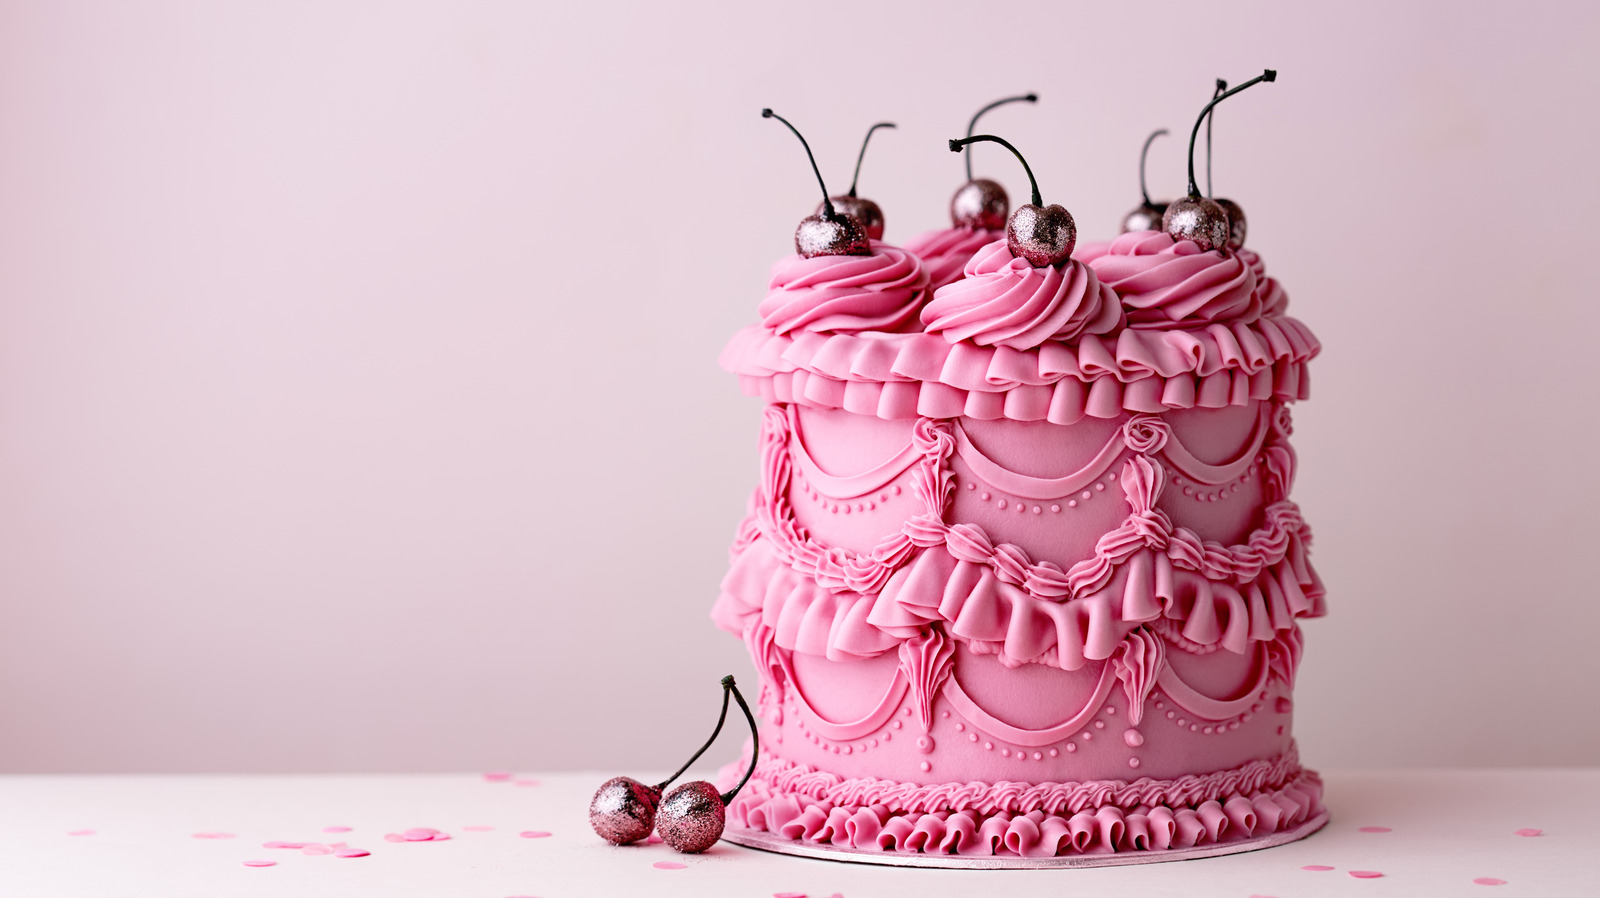 Reddit Is Divided On This Oddly Satisfying Cake Decorating